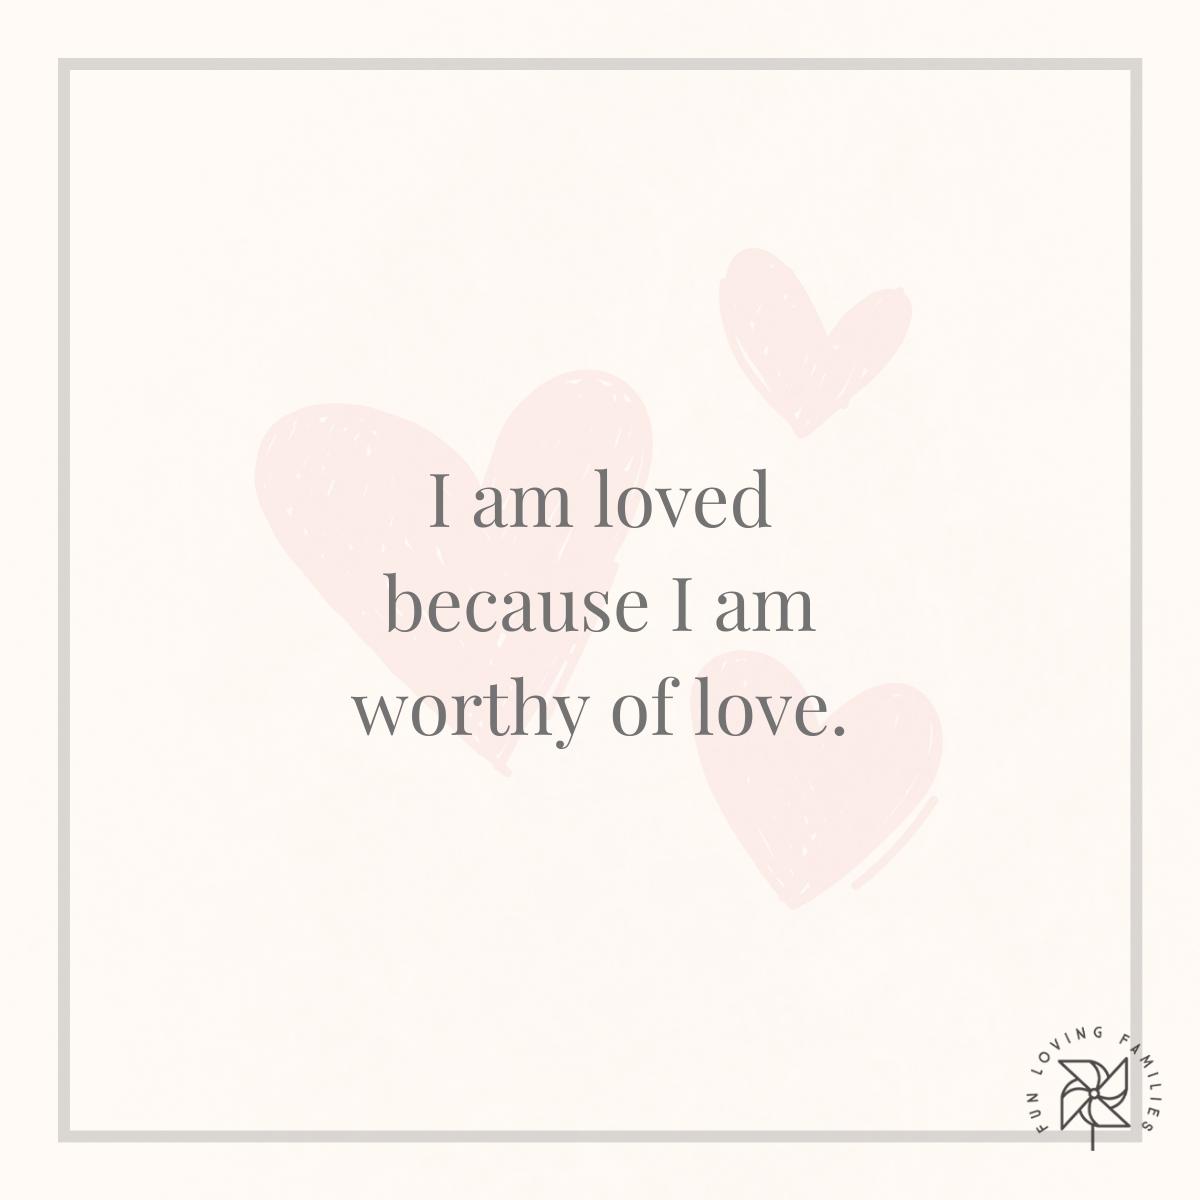 I am loved because I am worthy of love affirmation